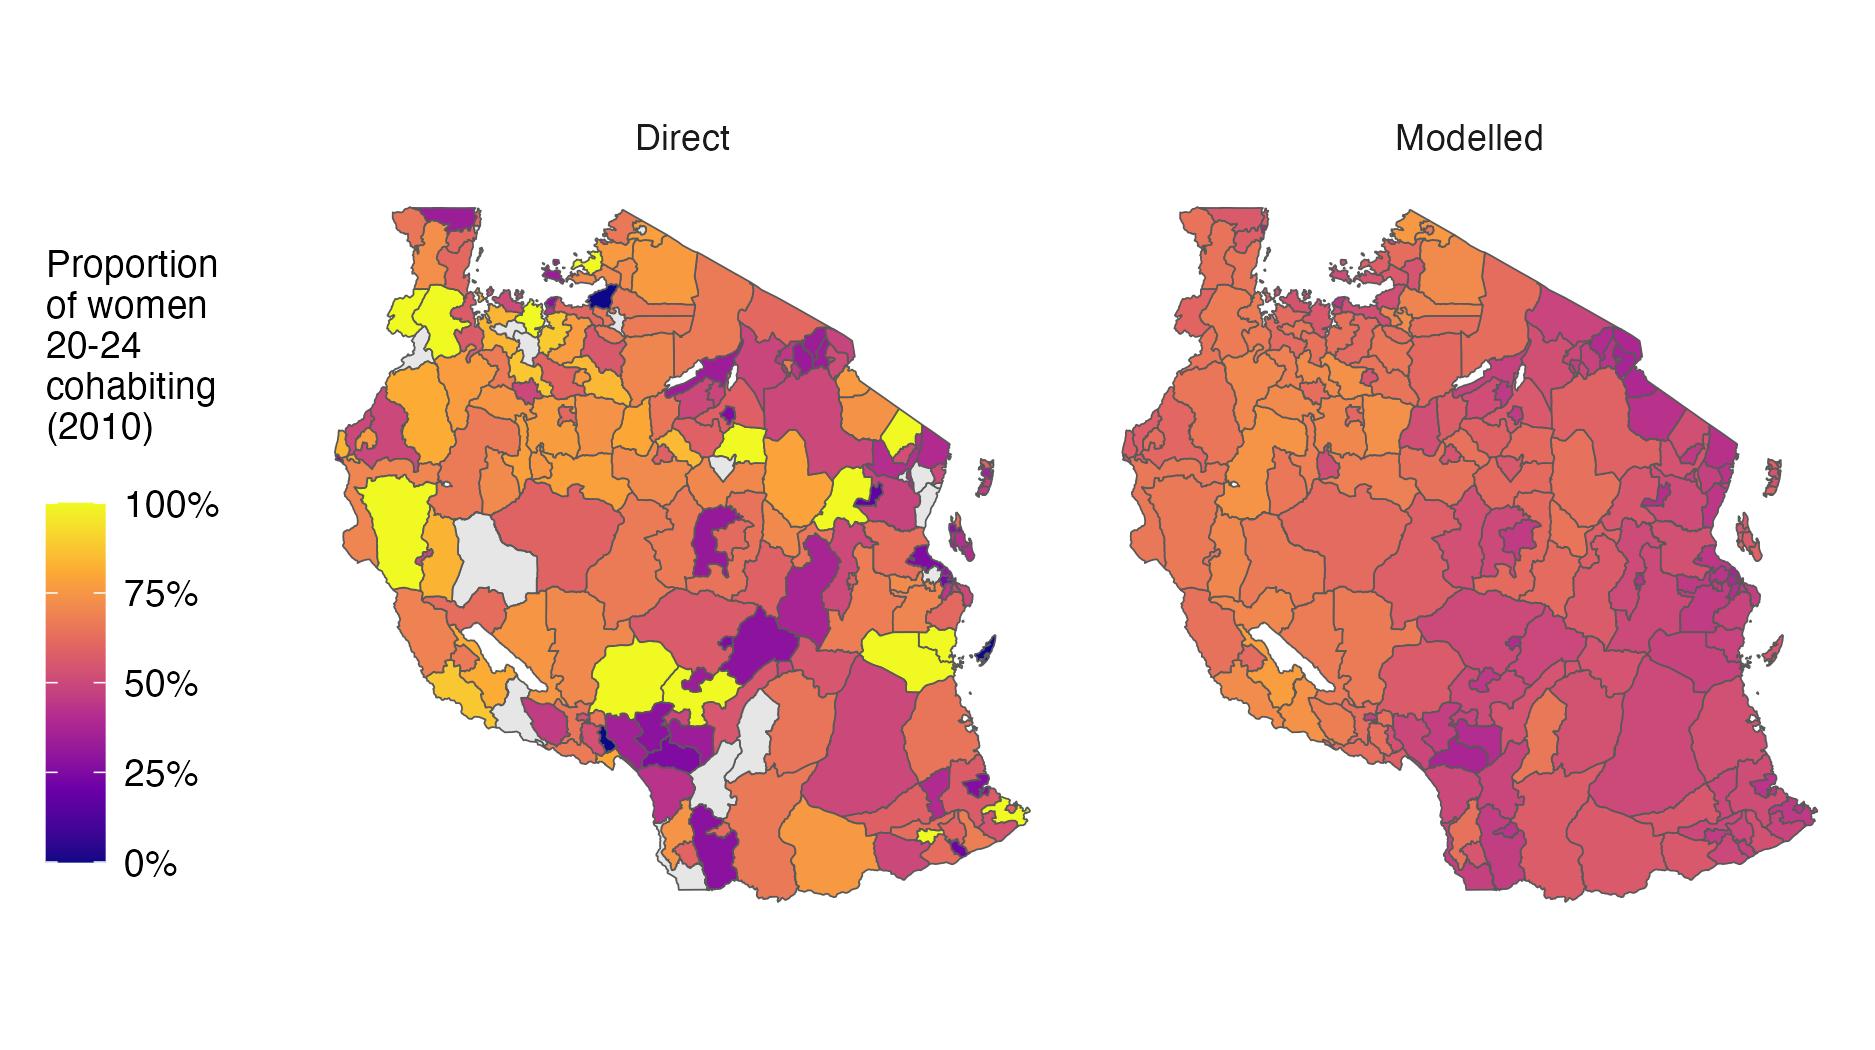 The modelled estimates display more plausible spatial smoothness than the direct estimates. In addition, missing values in the direct estimates are appropriately infilled by the model.